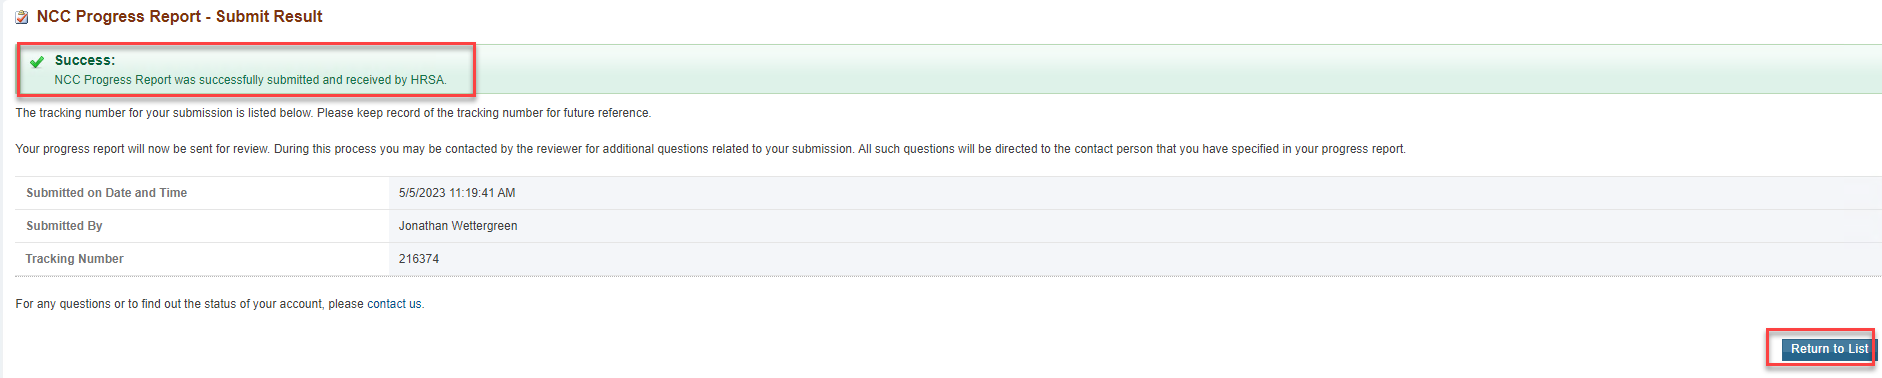 Screenshot of Submit Result Page